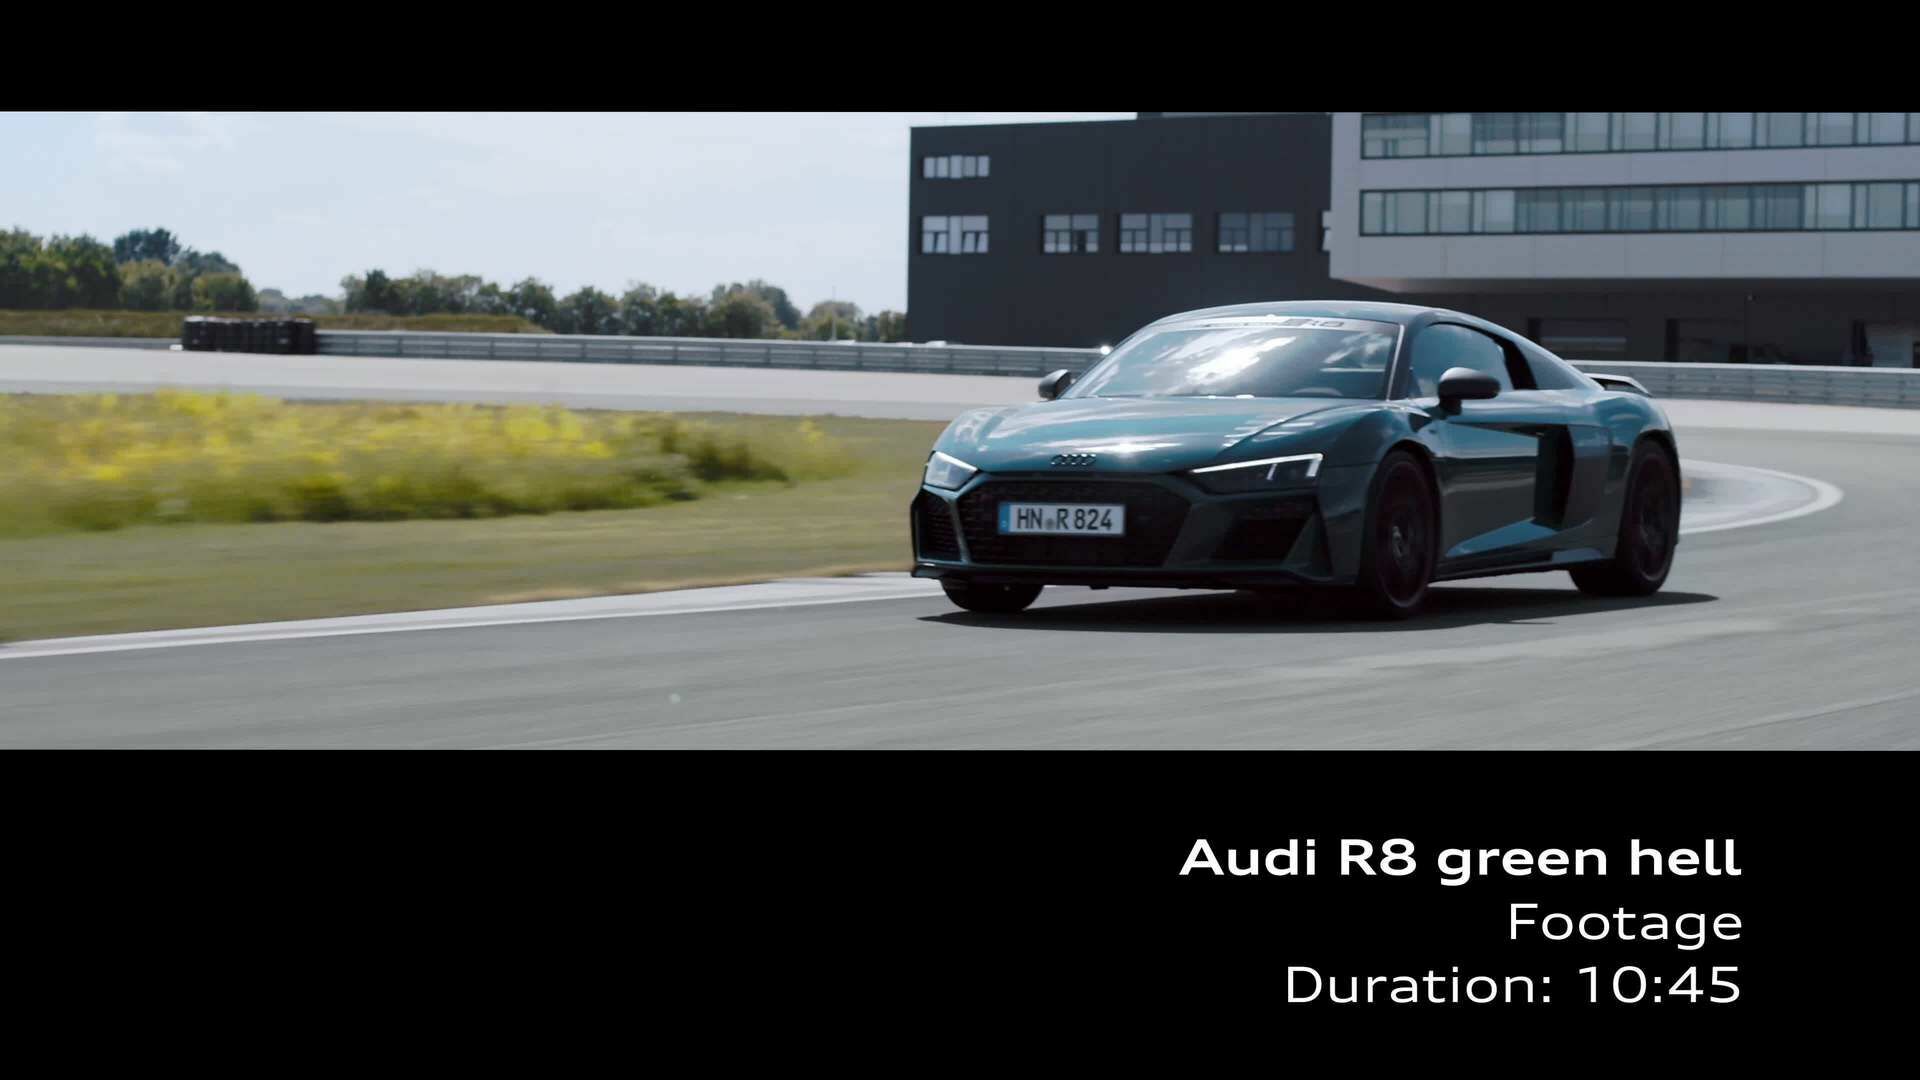 Footage: Audi R8 green hell